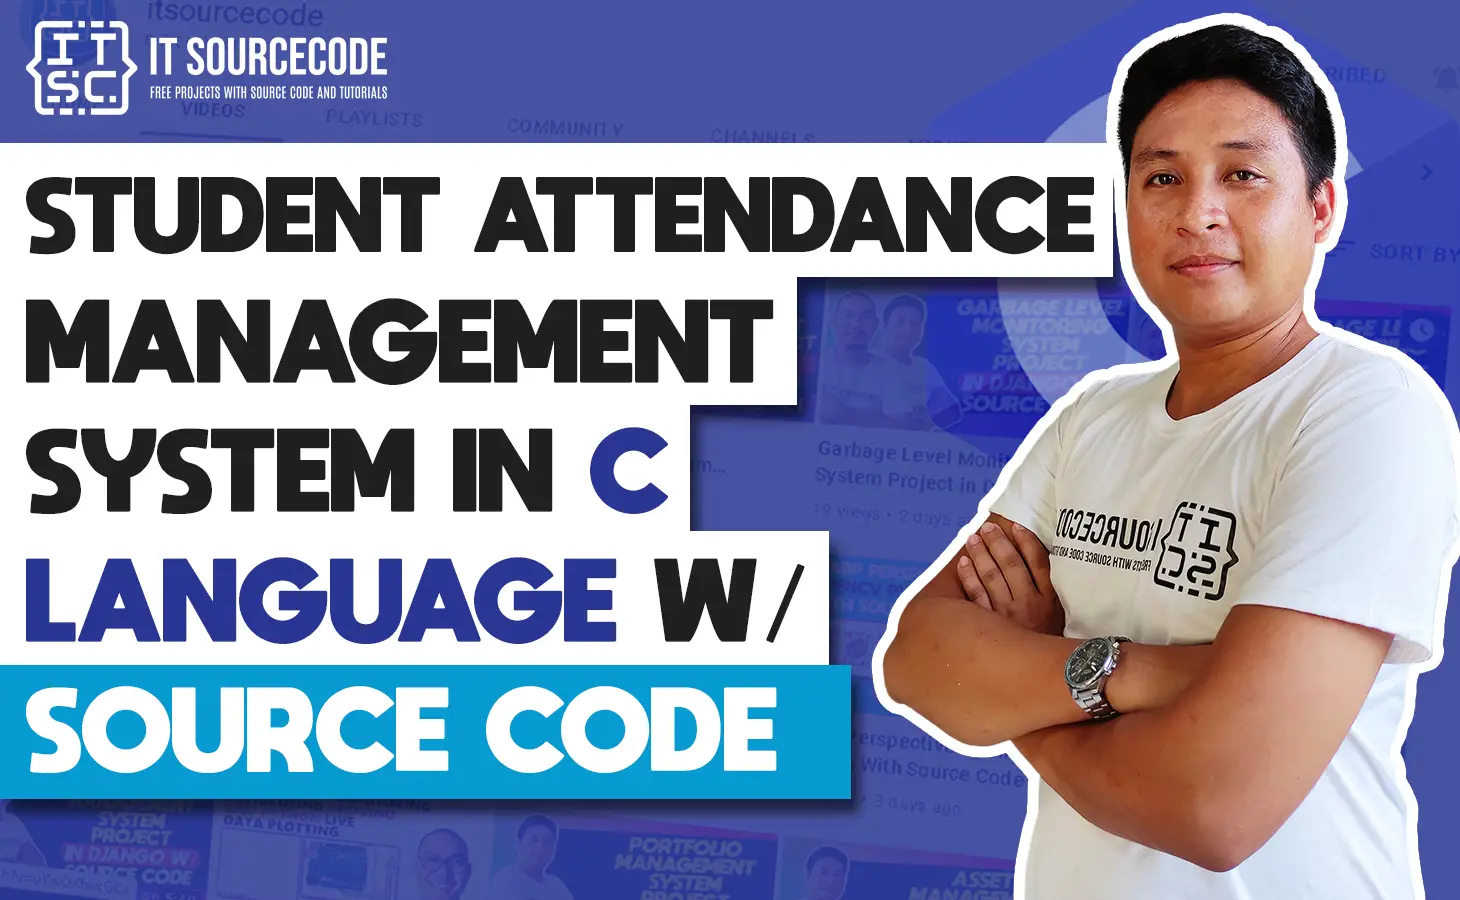 student attendance management system in c language with Source code